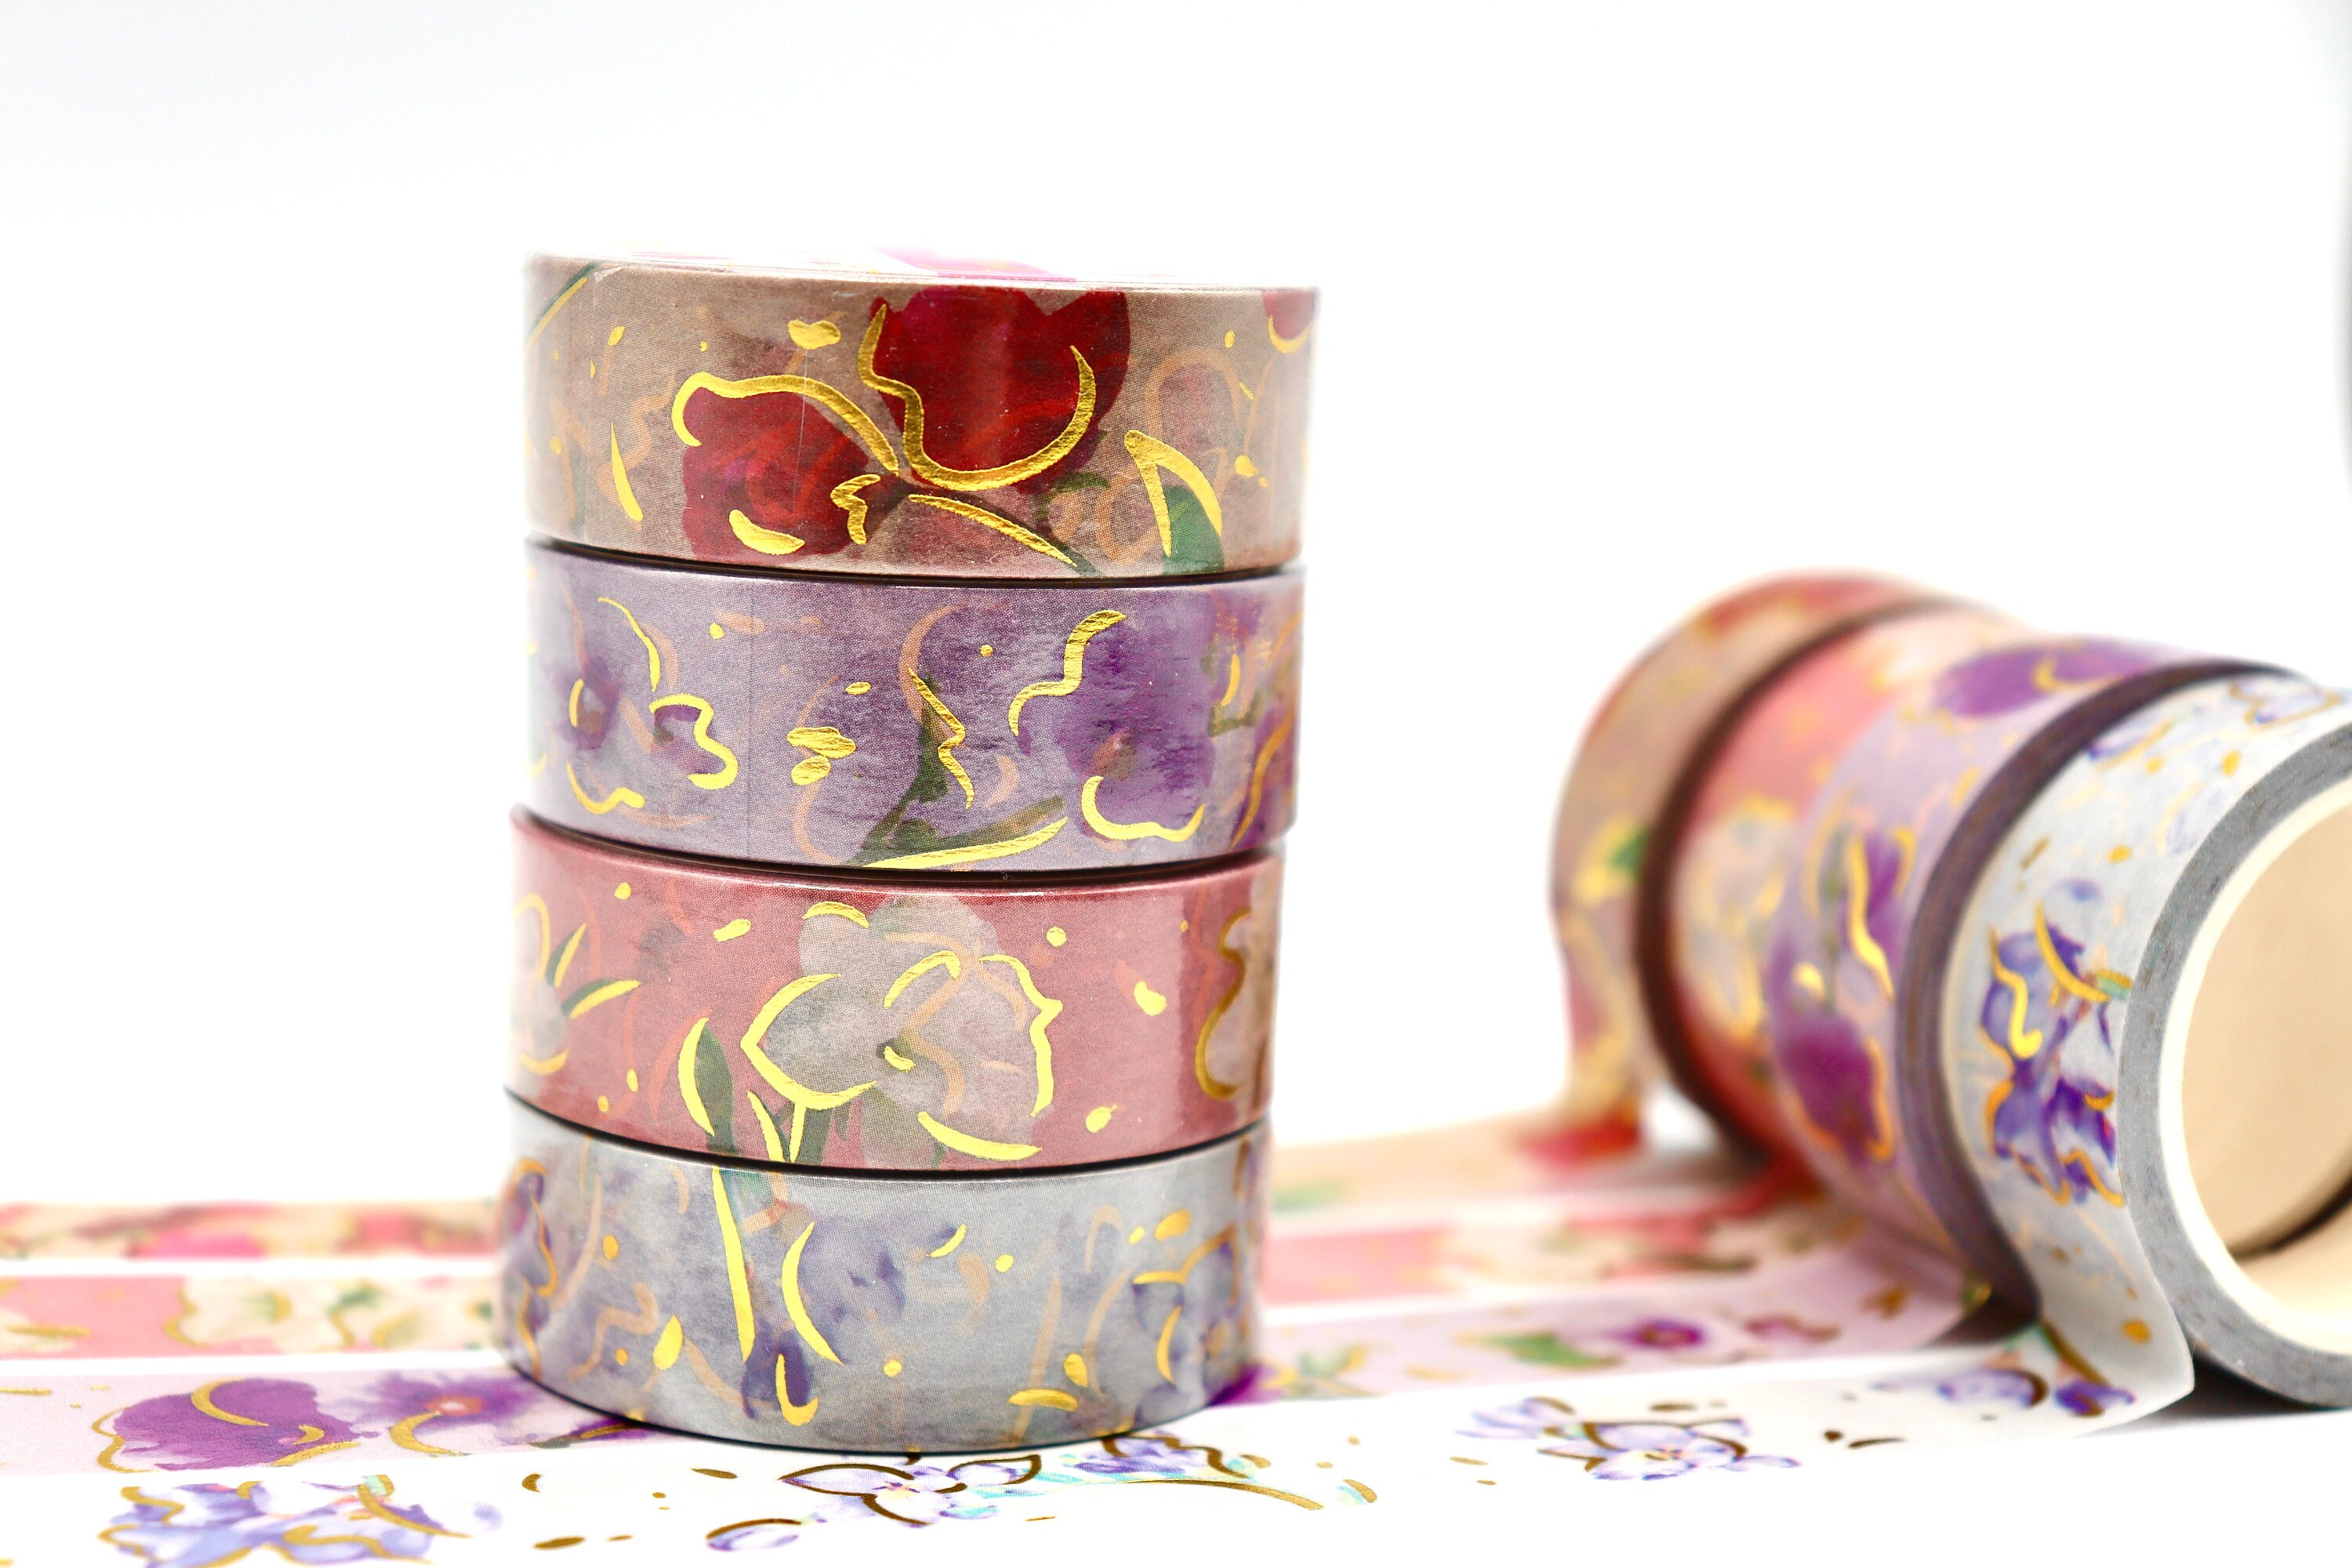 Floral Washi Tape Set Decorative Tape for Crafts Planner Decorations  Journal Embellishments Cute Stationery Set of 4 Rolls 